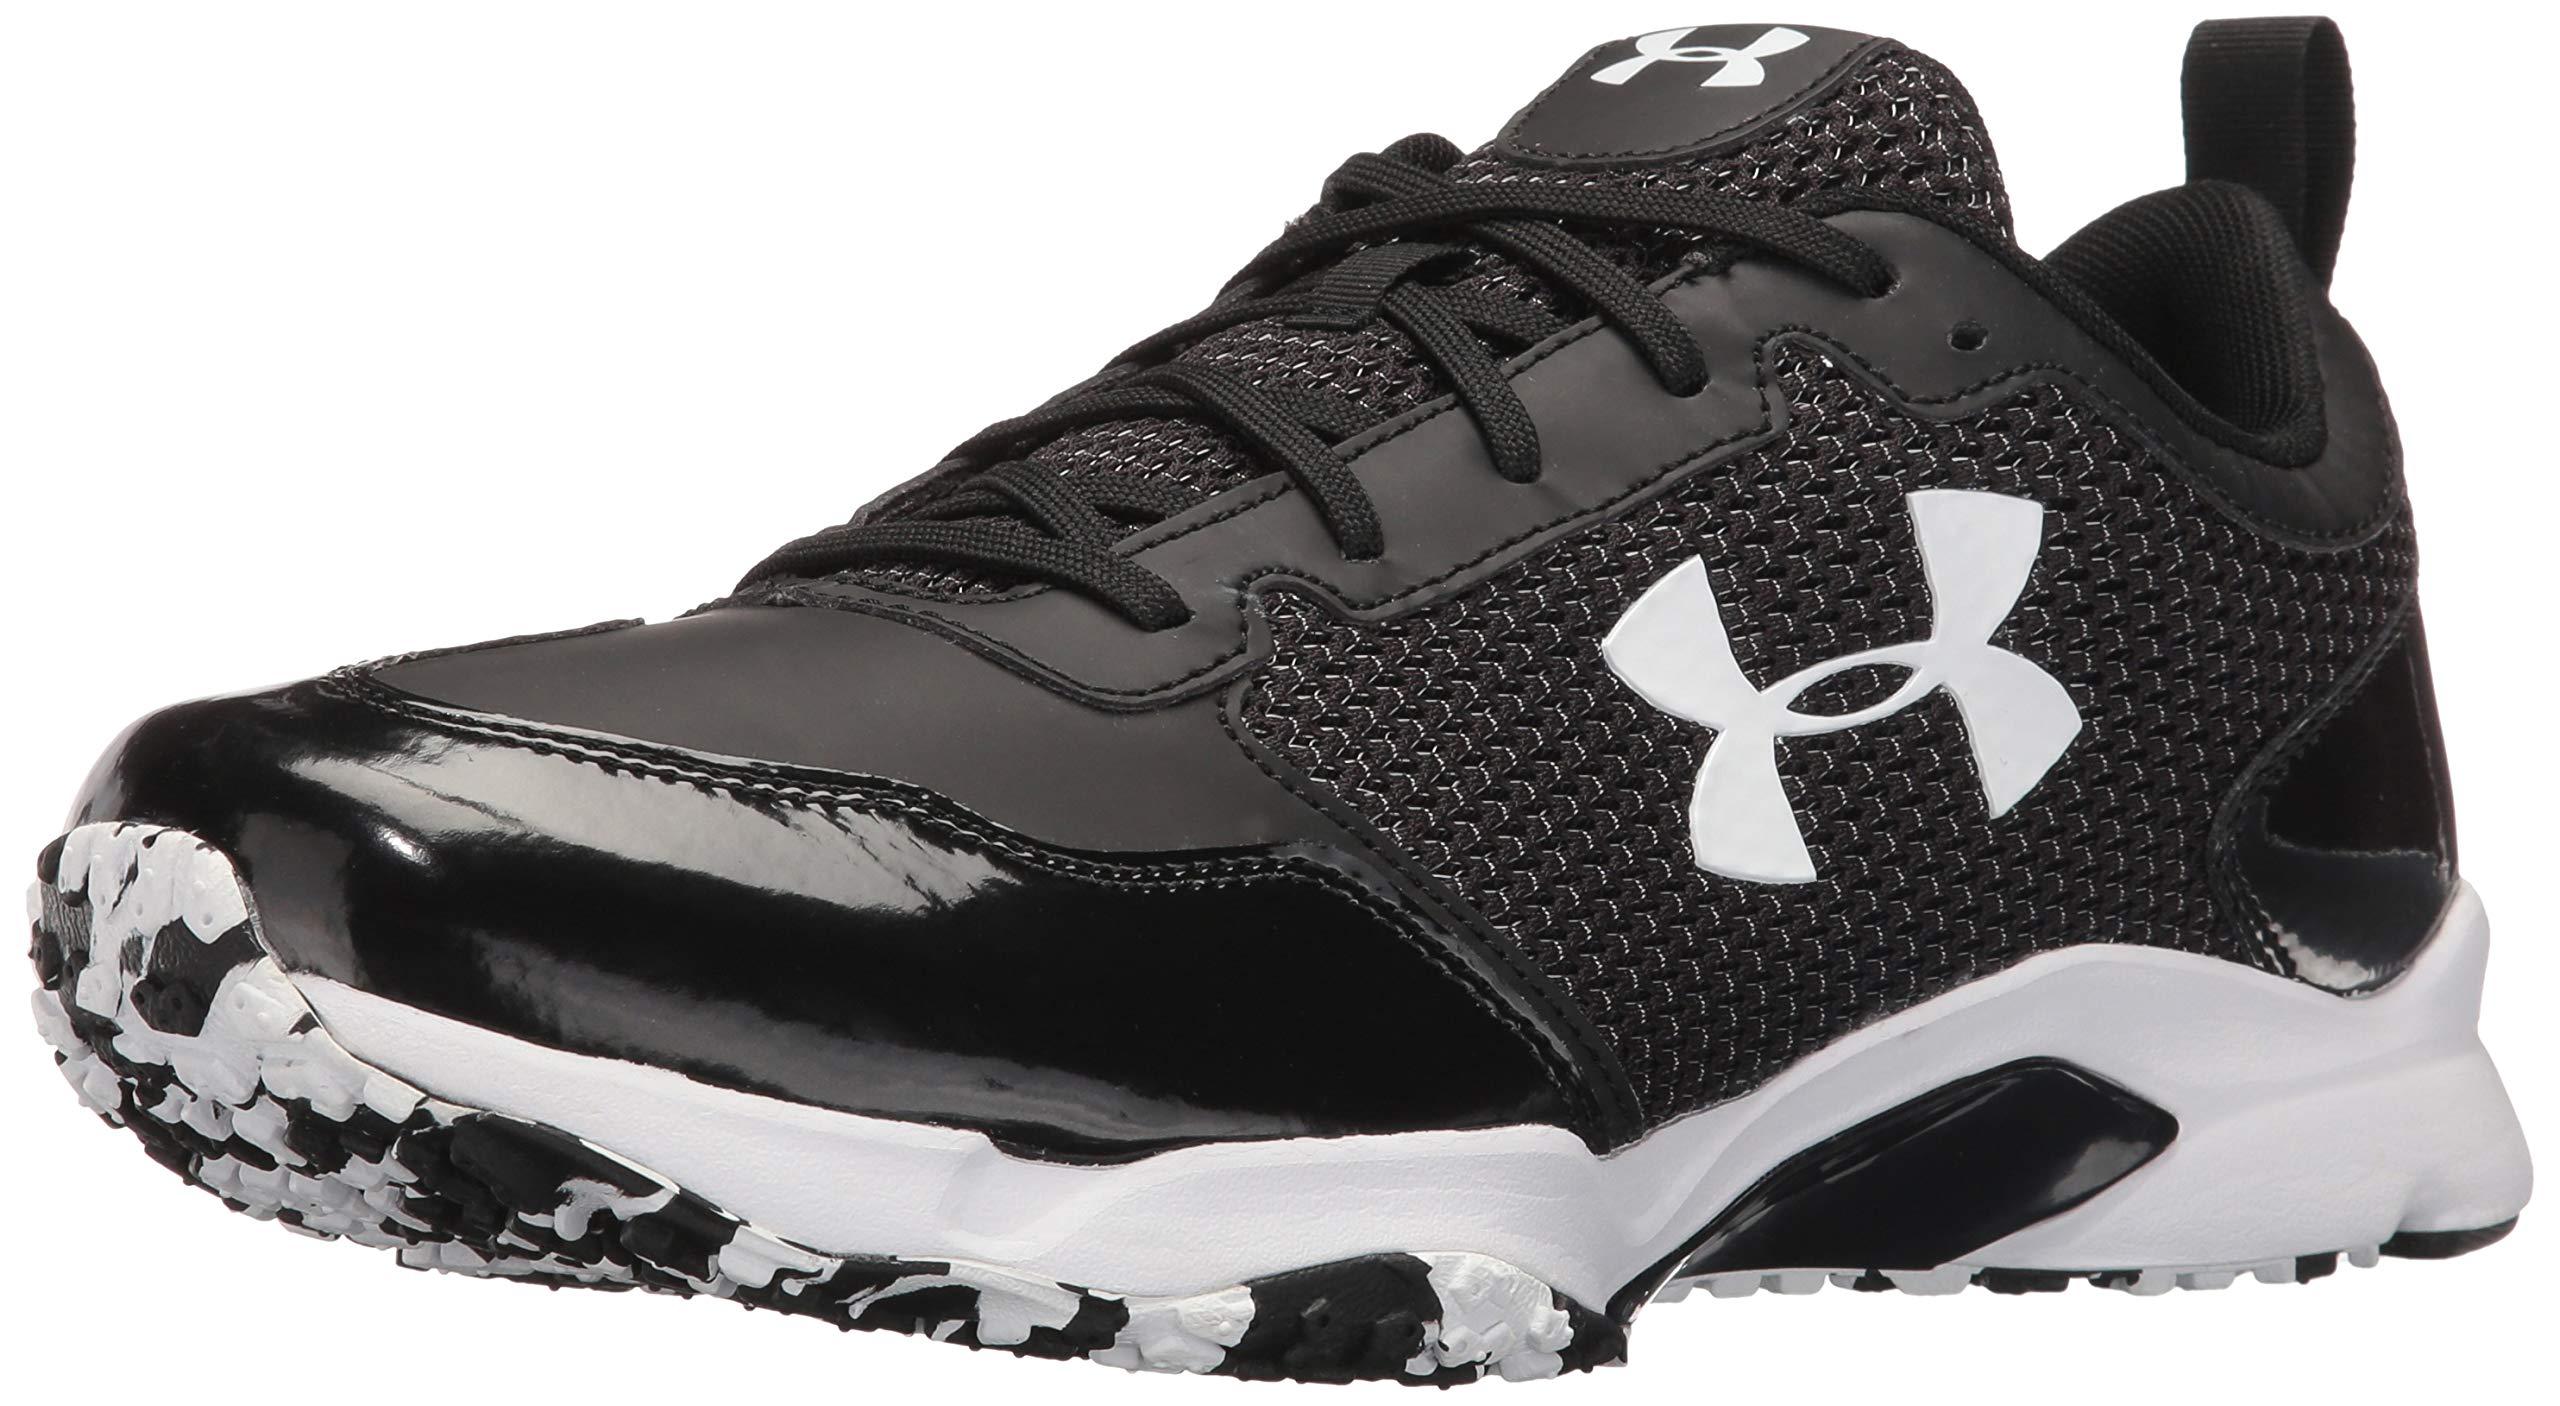 Under Armour Synthetic Ultimate Turf Trainer Baseball Shoe in Black/Black  (Black) for Men | Lyst